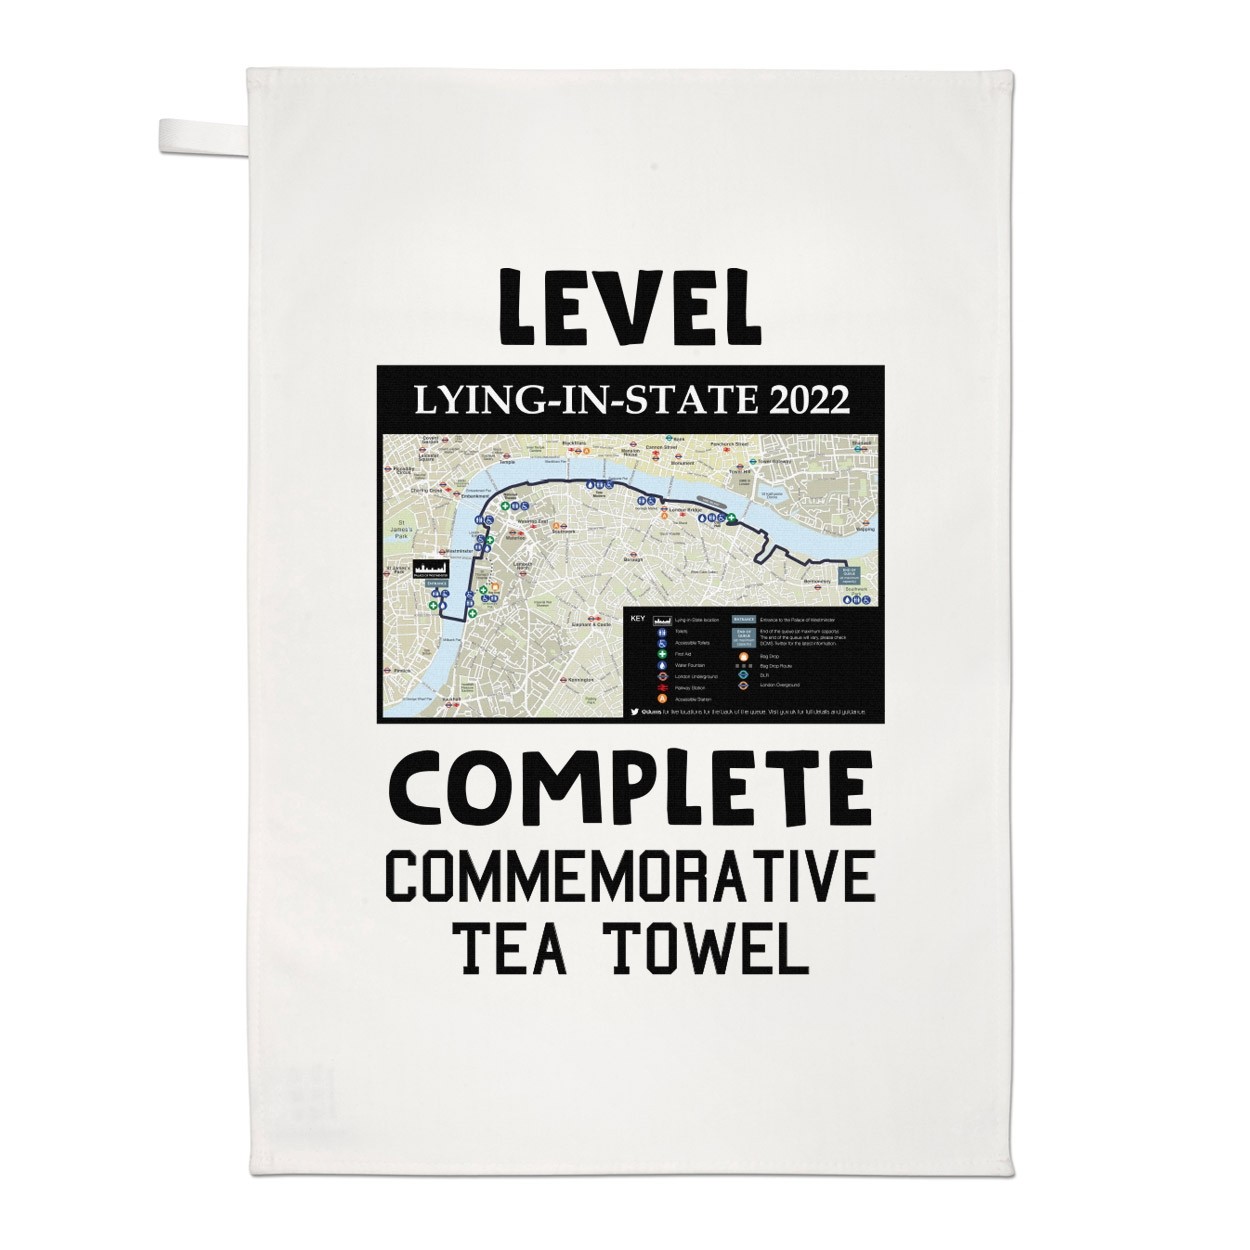 Queen Elizabeth II Lying In State Queue Map Level Complete 1926 - 2022 Tea Towel Dish Cloth Flag Commemorative Gift Her Majesty